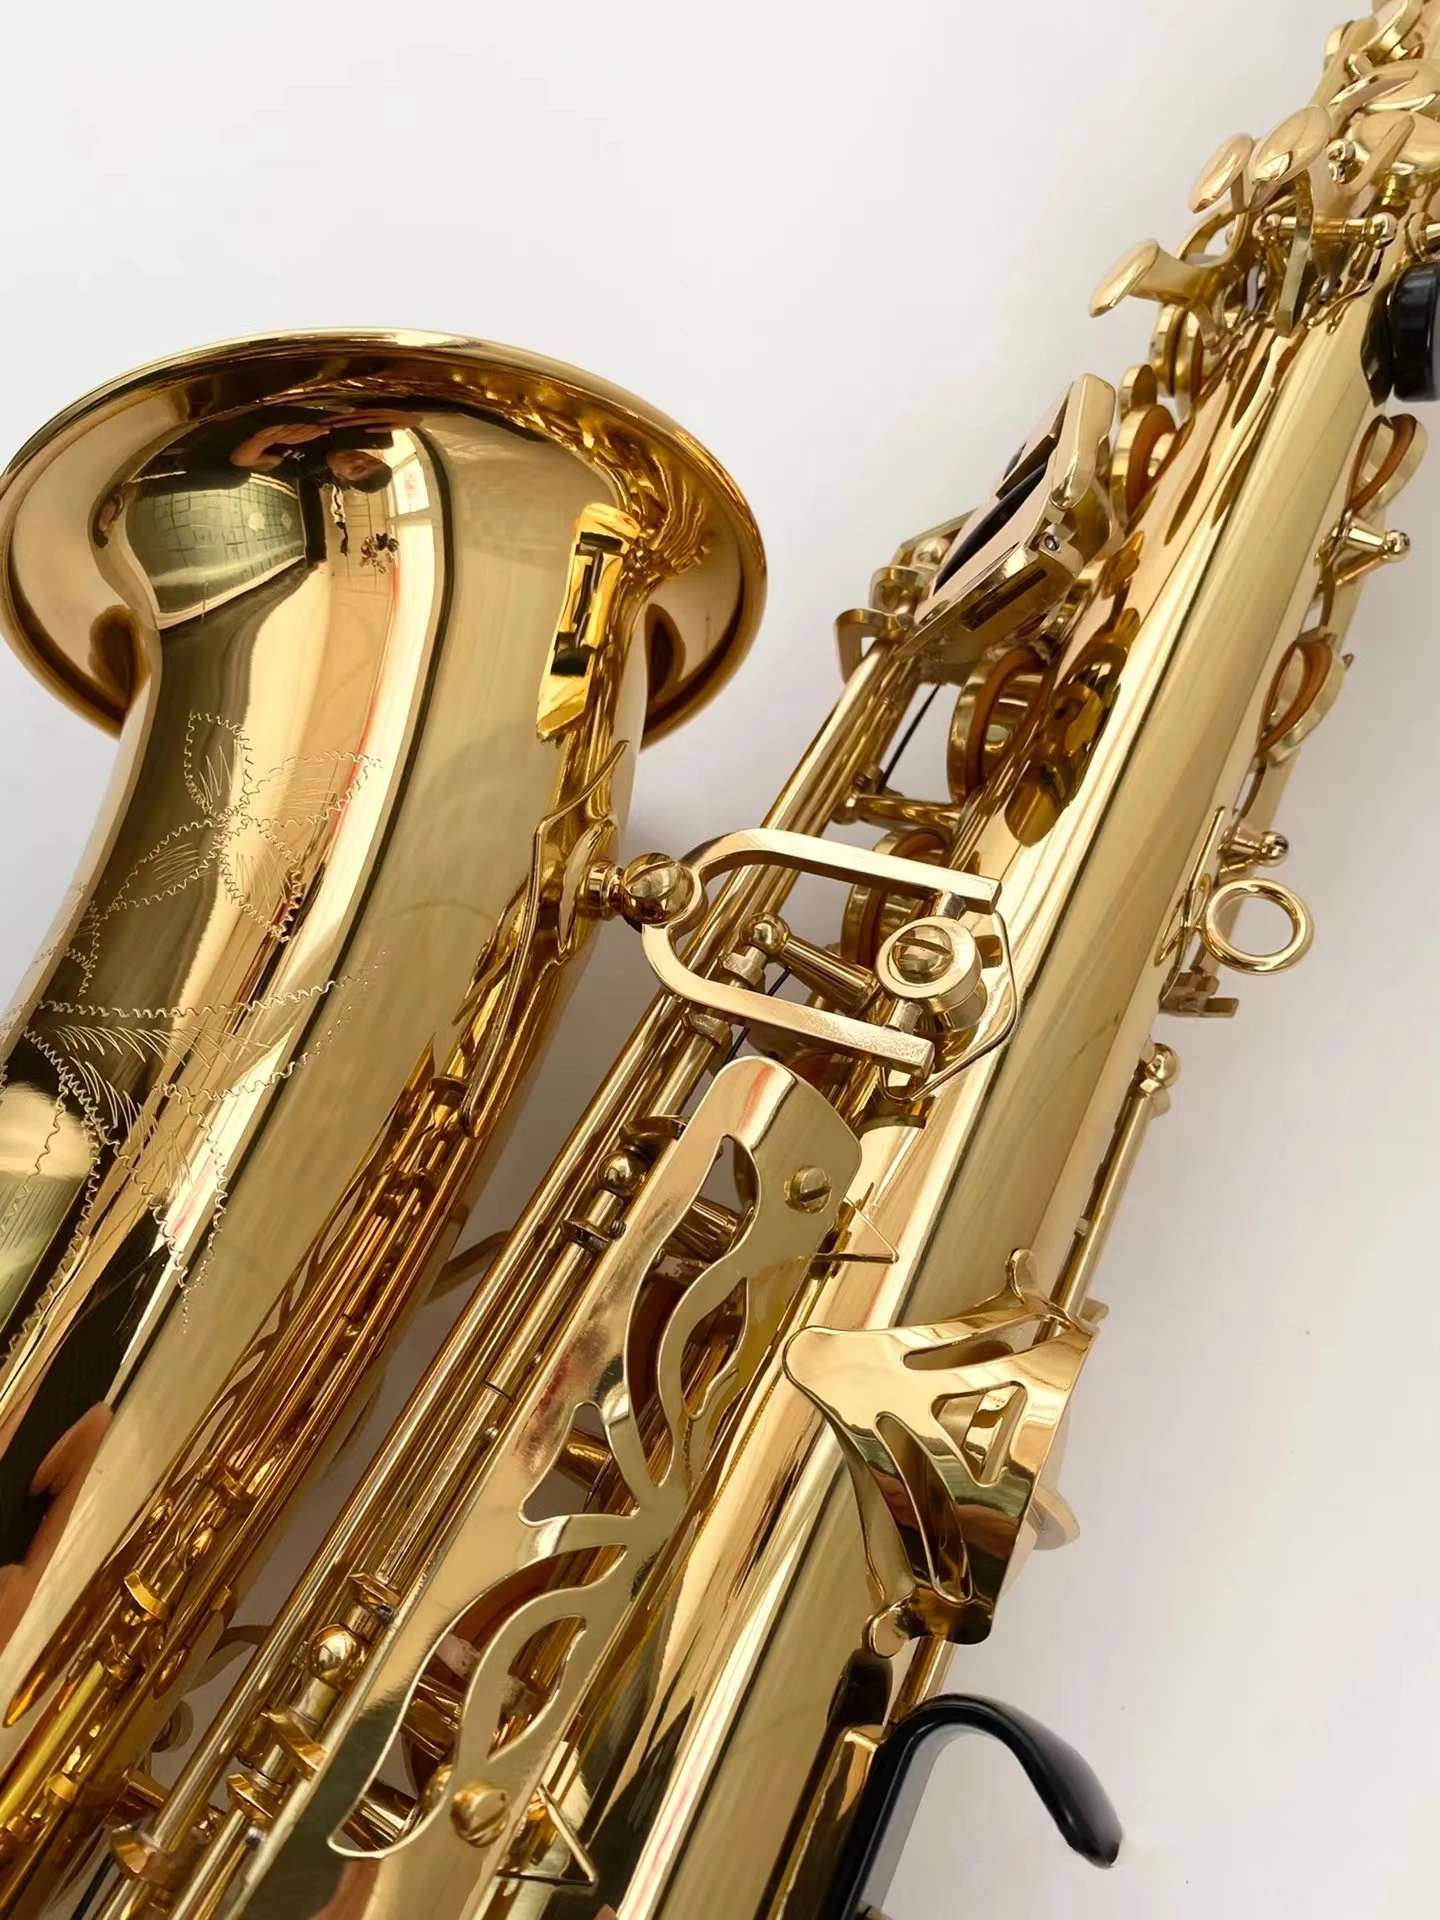 Professional Alto saxophone original 62 one to one structure model brass gold-plated shell button alto sax musical instrument